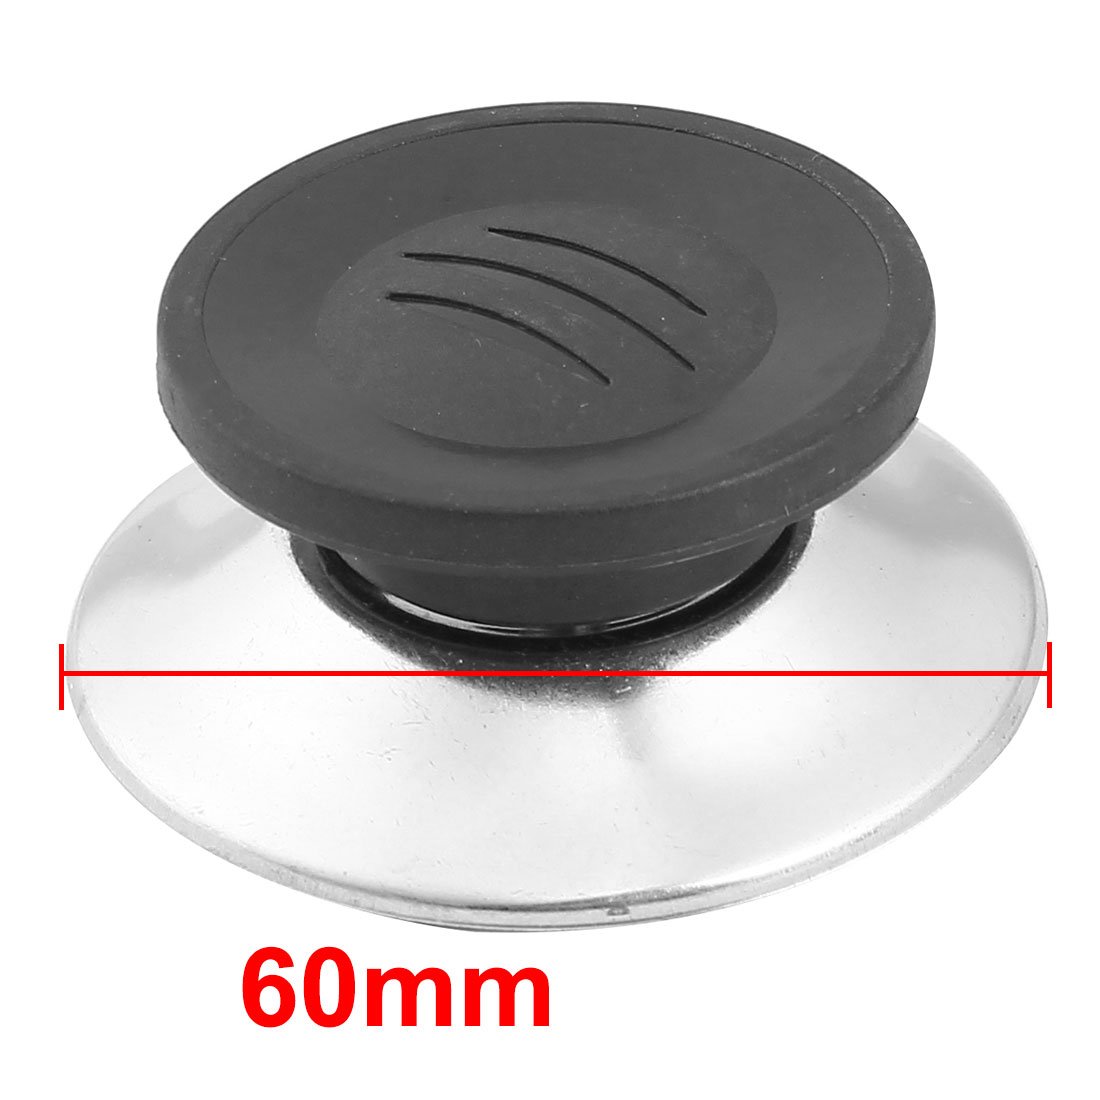 uxcell a17030700ux0108 Kitchen Round Cookware Replacement Skillet Stockpot Kettle Frying Pan Pot Handle Lid Cover Knob